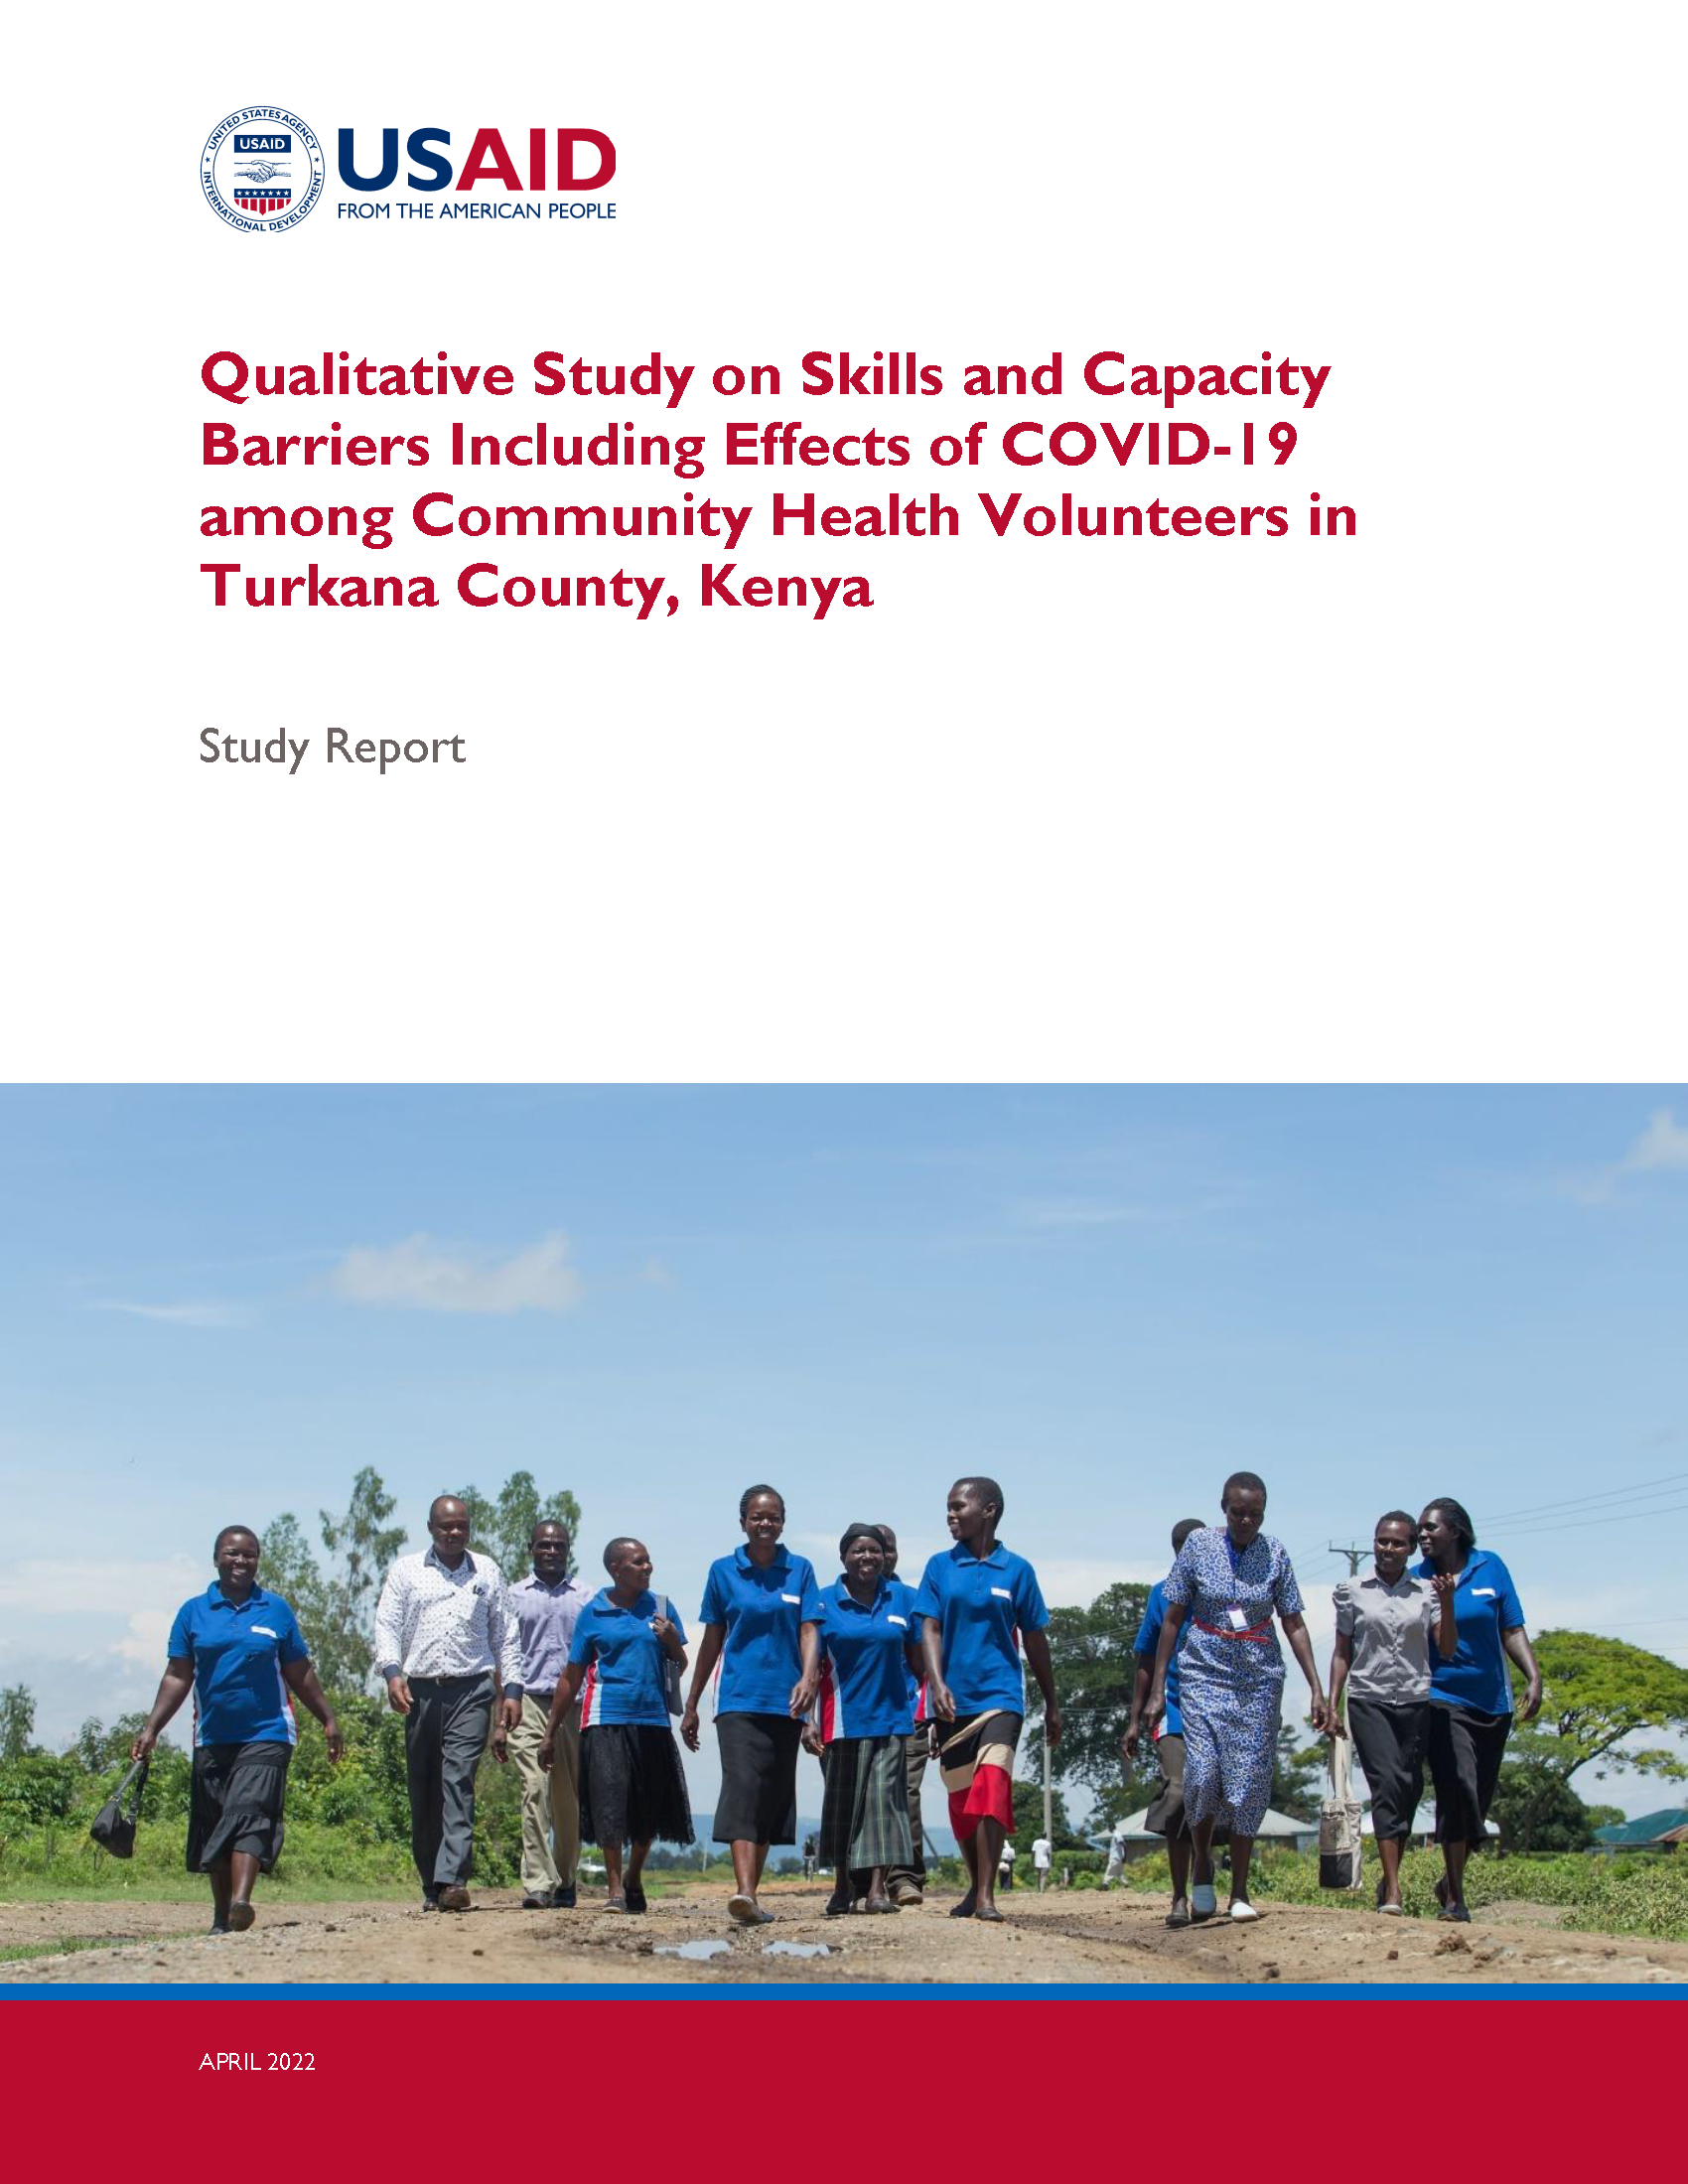 Cover page for Qualitative Study on Skills and Capacity Barriers in Turkana County, Kenya: Study Report